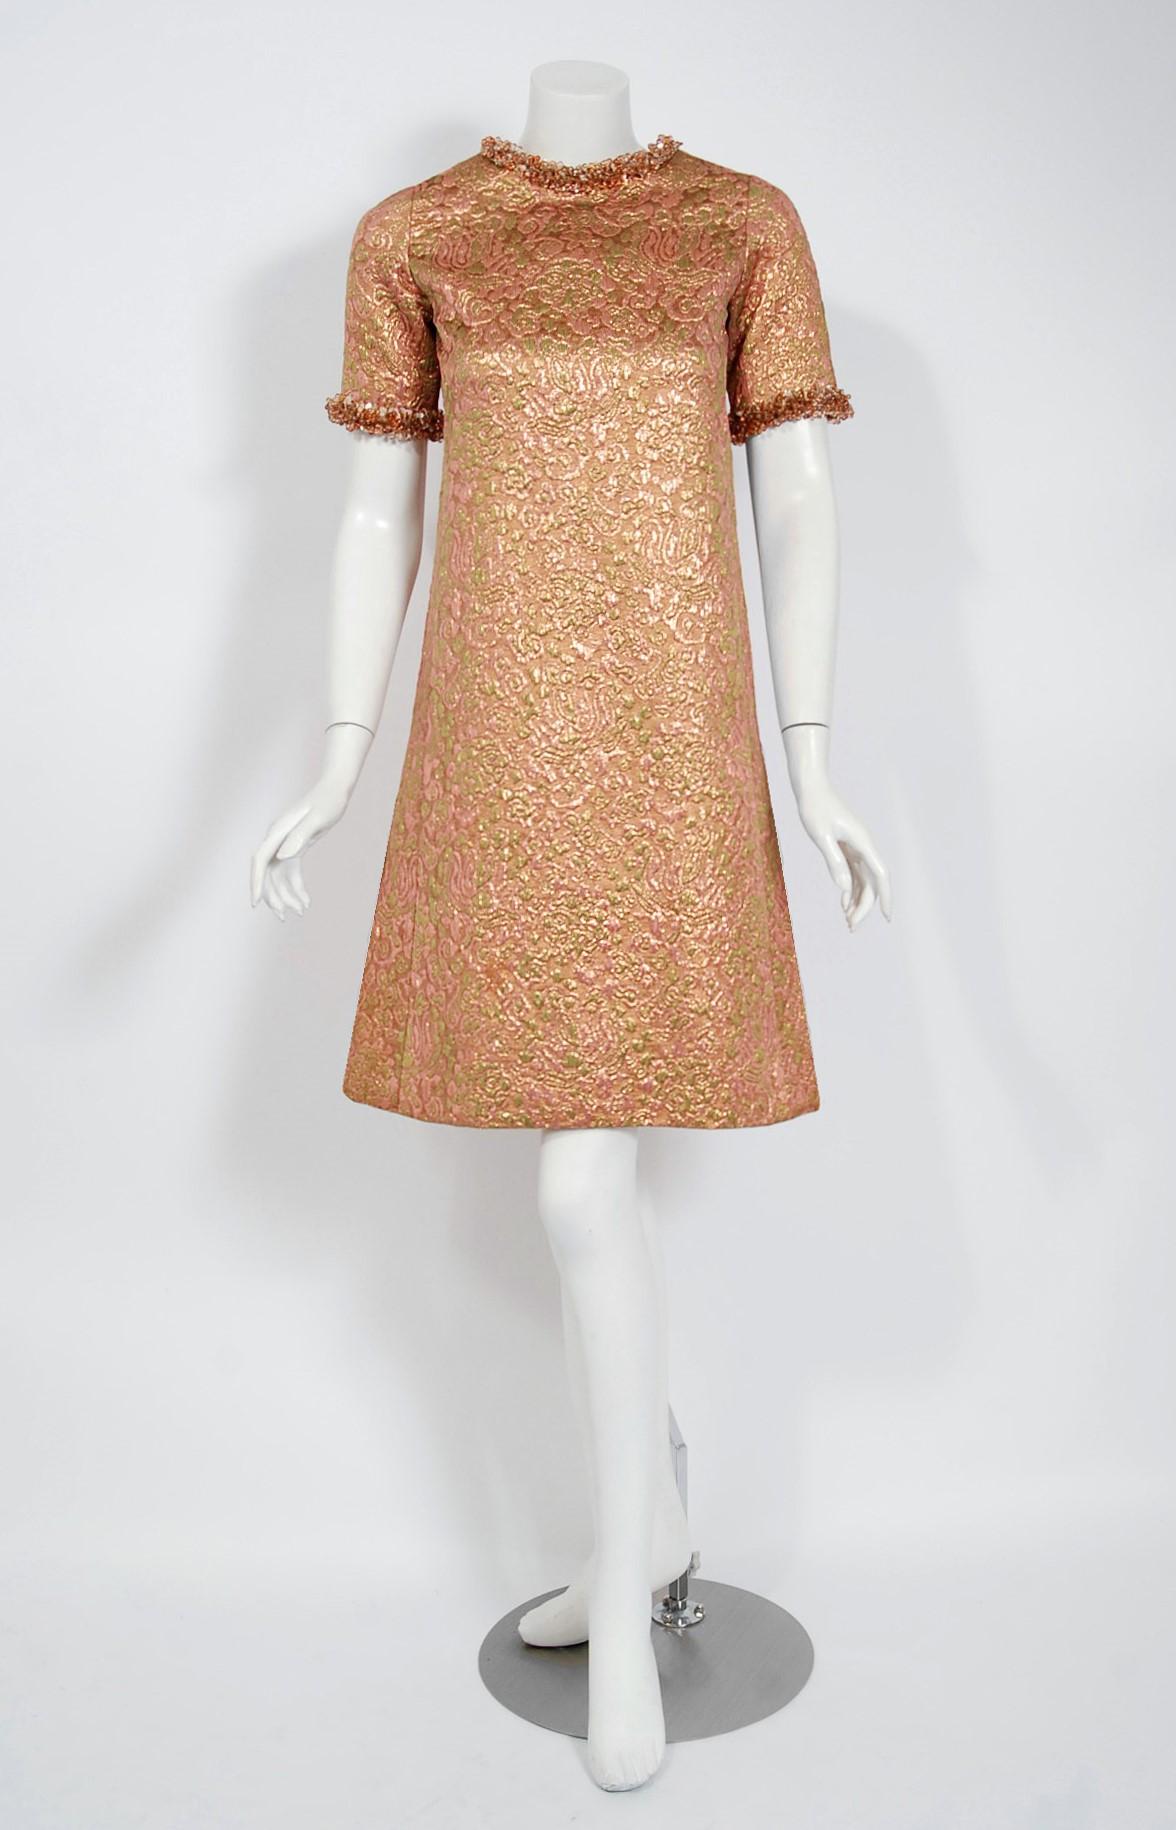 This exceptionally chic metallic silk-brocade cocktail dress is from the infamous Rive Gauche collection during Fall-Winter 1966. Pieces from this decade are very rare and are true examples of fashion history. The fabric itself is a mastepiece;